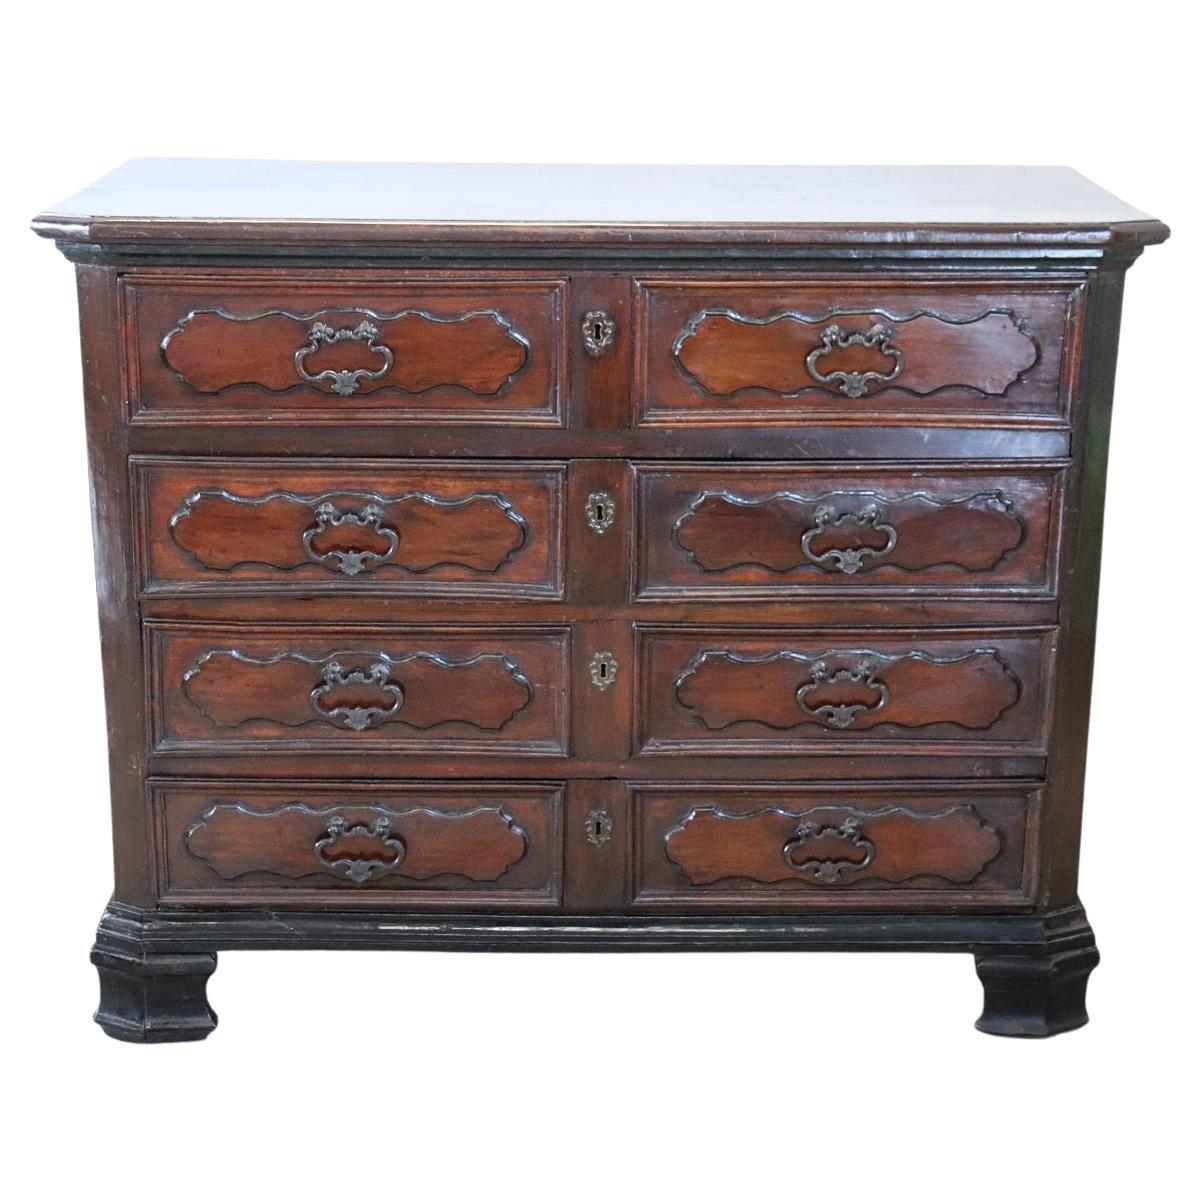 17th Century Italian Louis XIV Walnut Antique Commode or Chest of Drawers